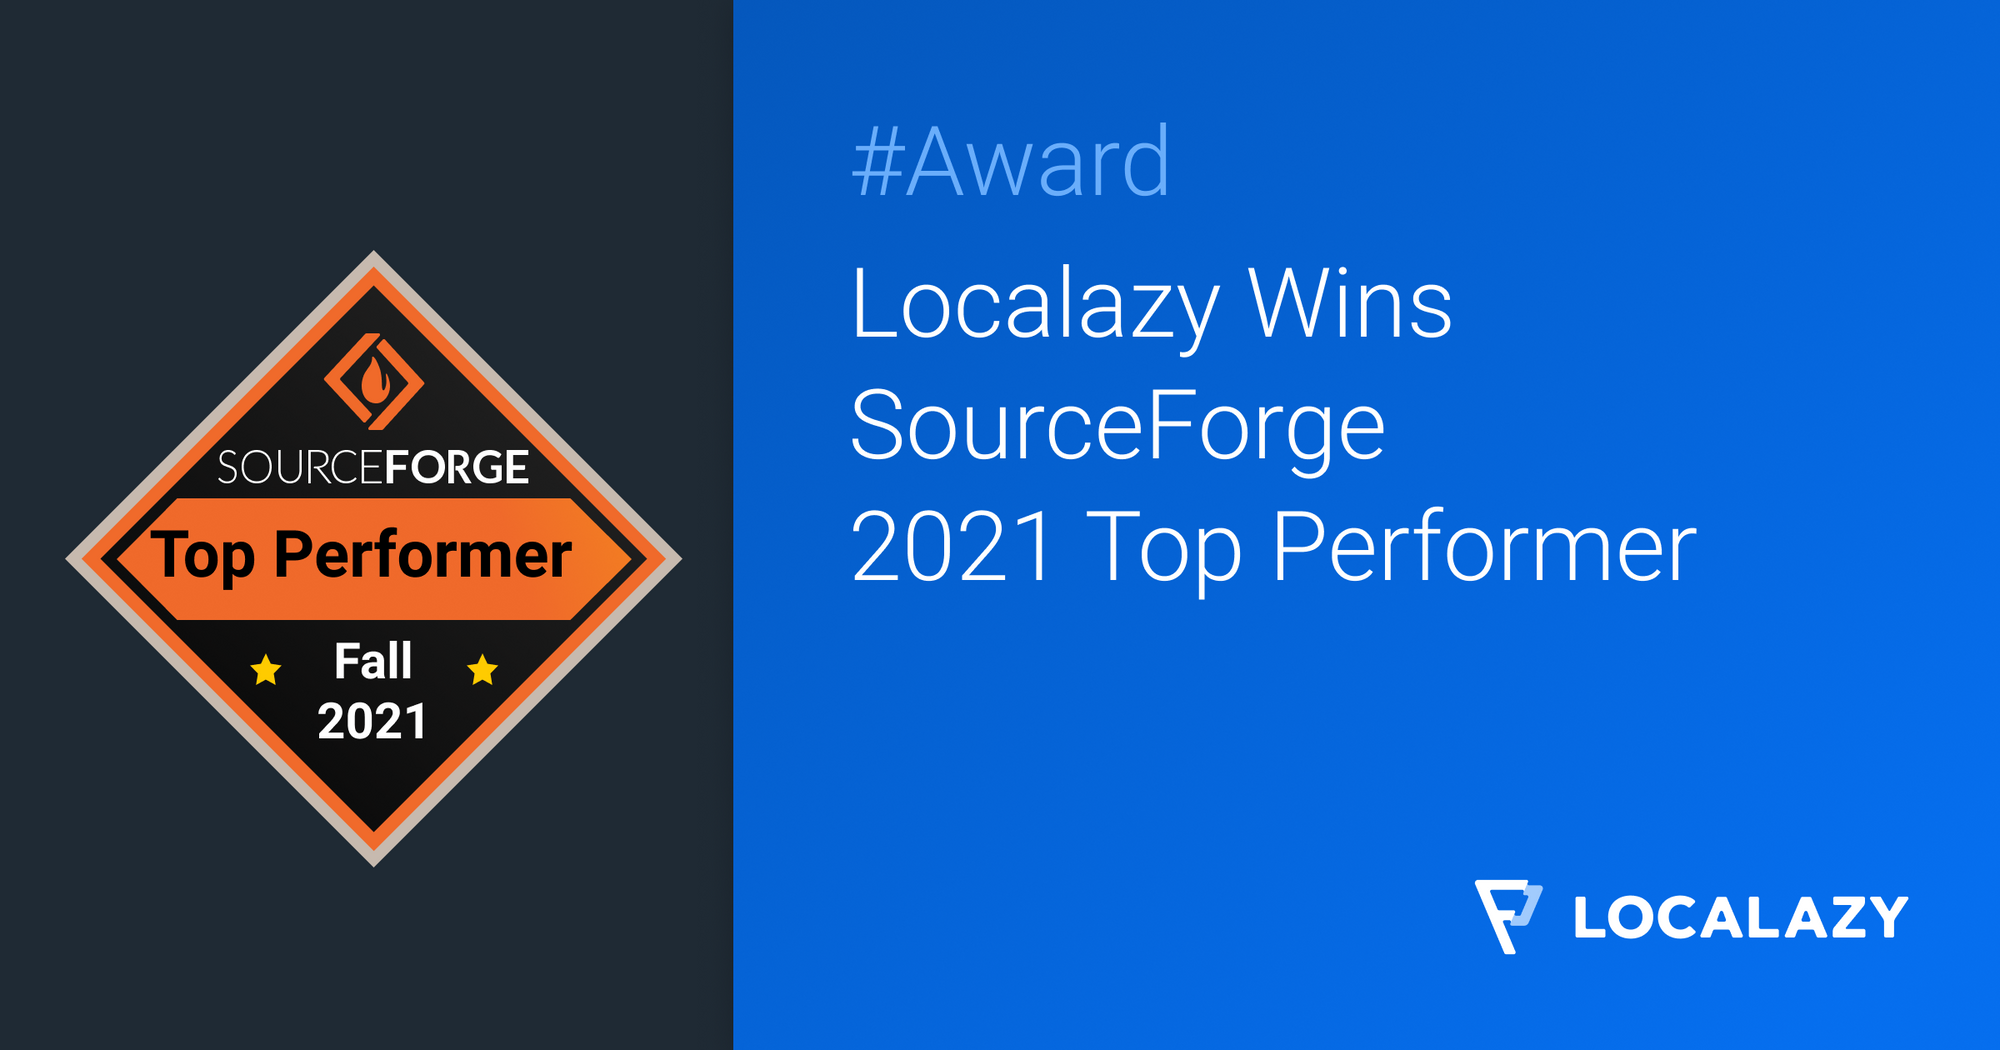 Localazy Wins a 2021 Top Performer Award 🏆 in Translation Management Category From SourceForge